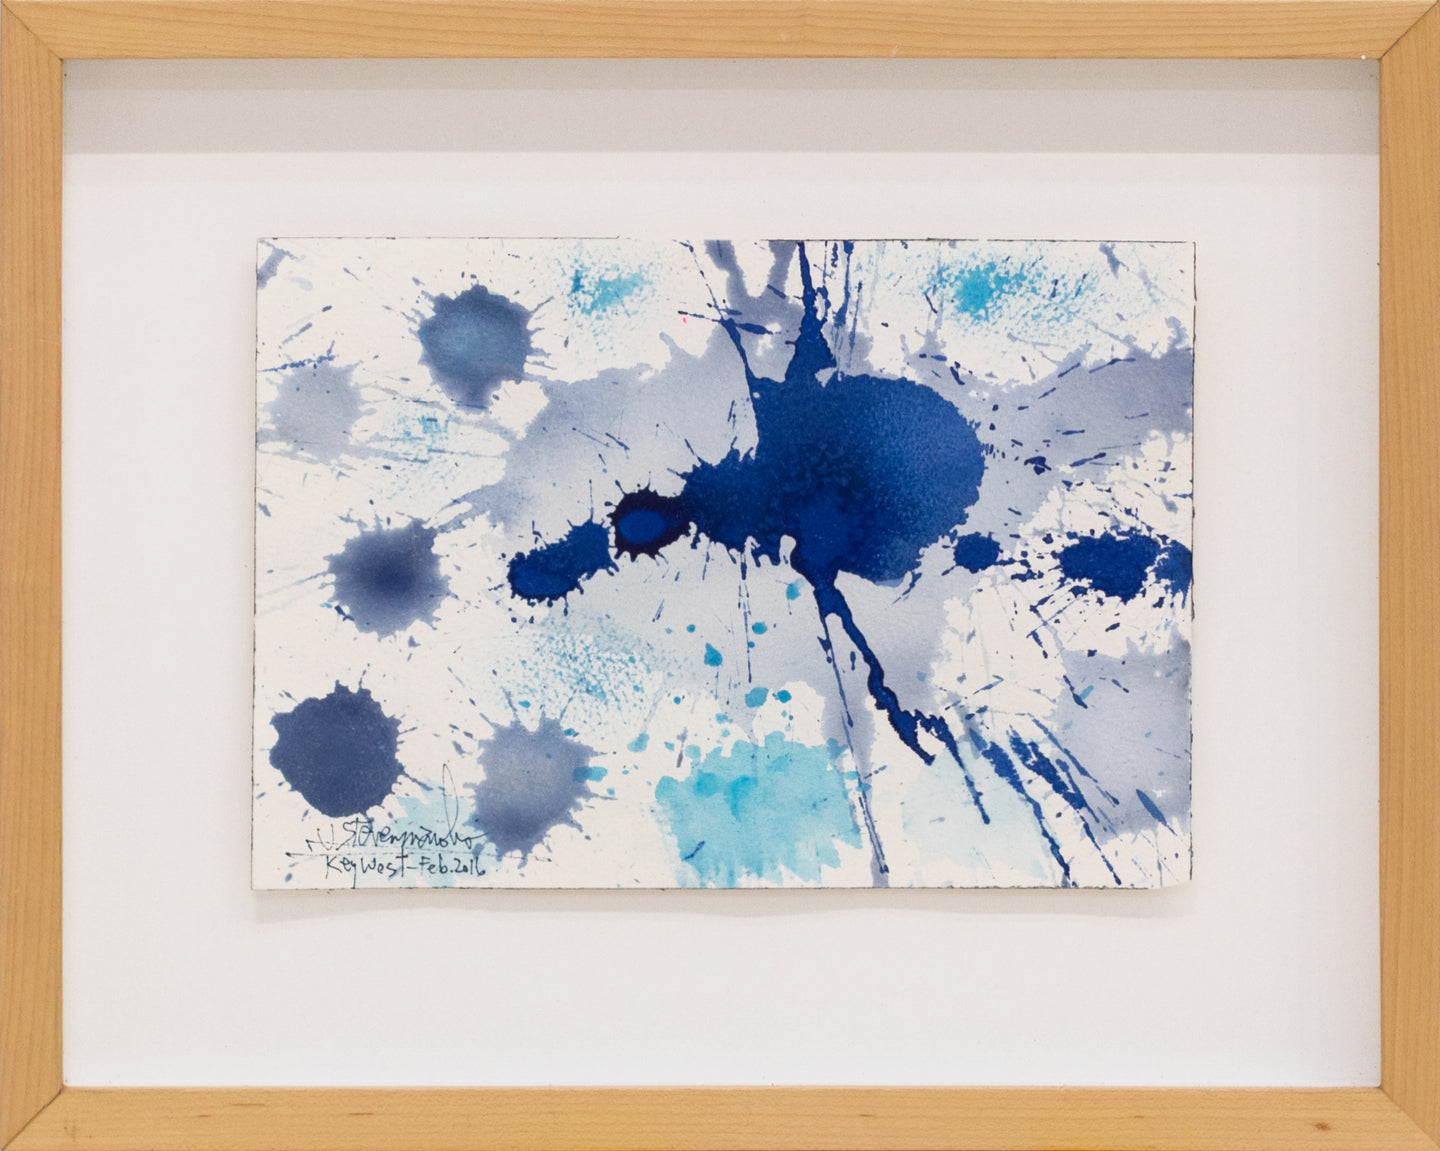 J. Steven Manolis, Splash (Key West) 07.10.05, 2016, Watercolor painting on Arches paper, 7 x 10 inches, Blue Abstract Art, Splash Art for sale at Manolis Projects Art Gallery, Miami, Fl